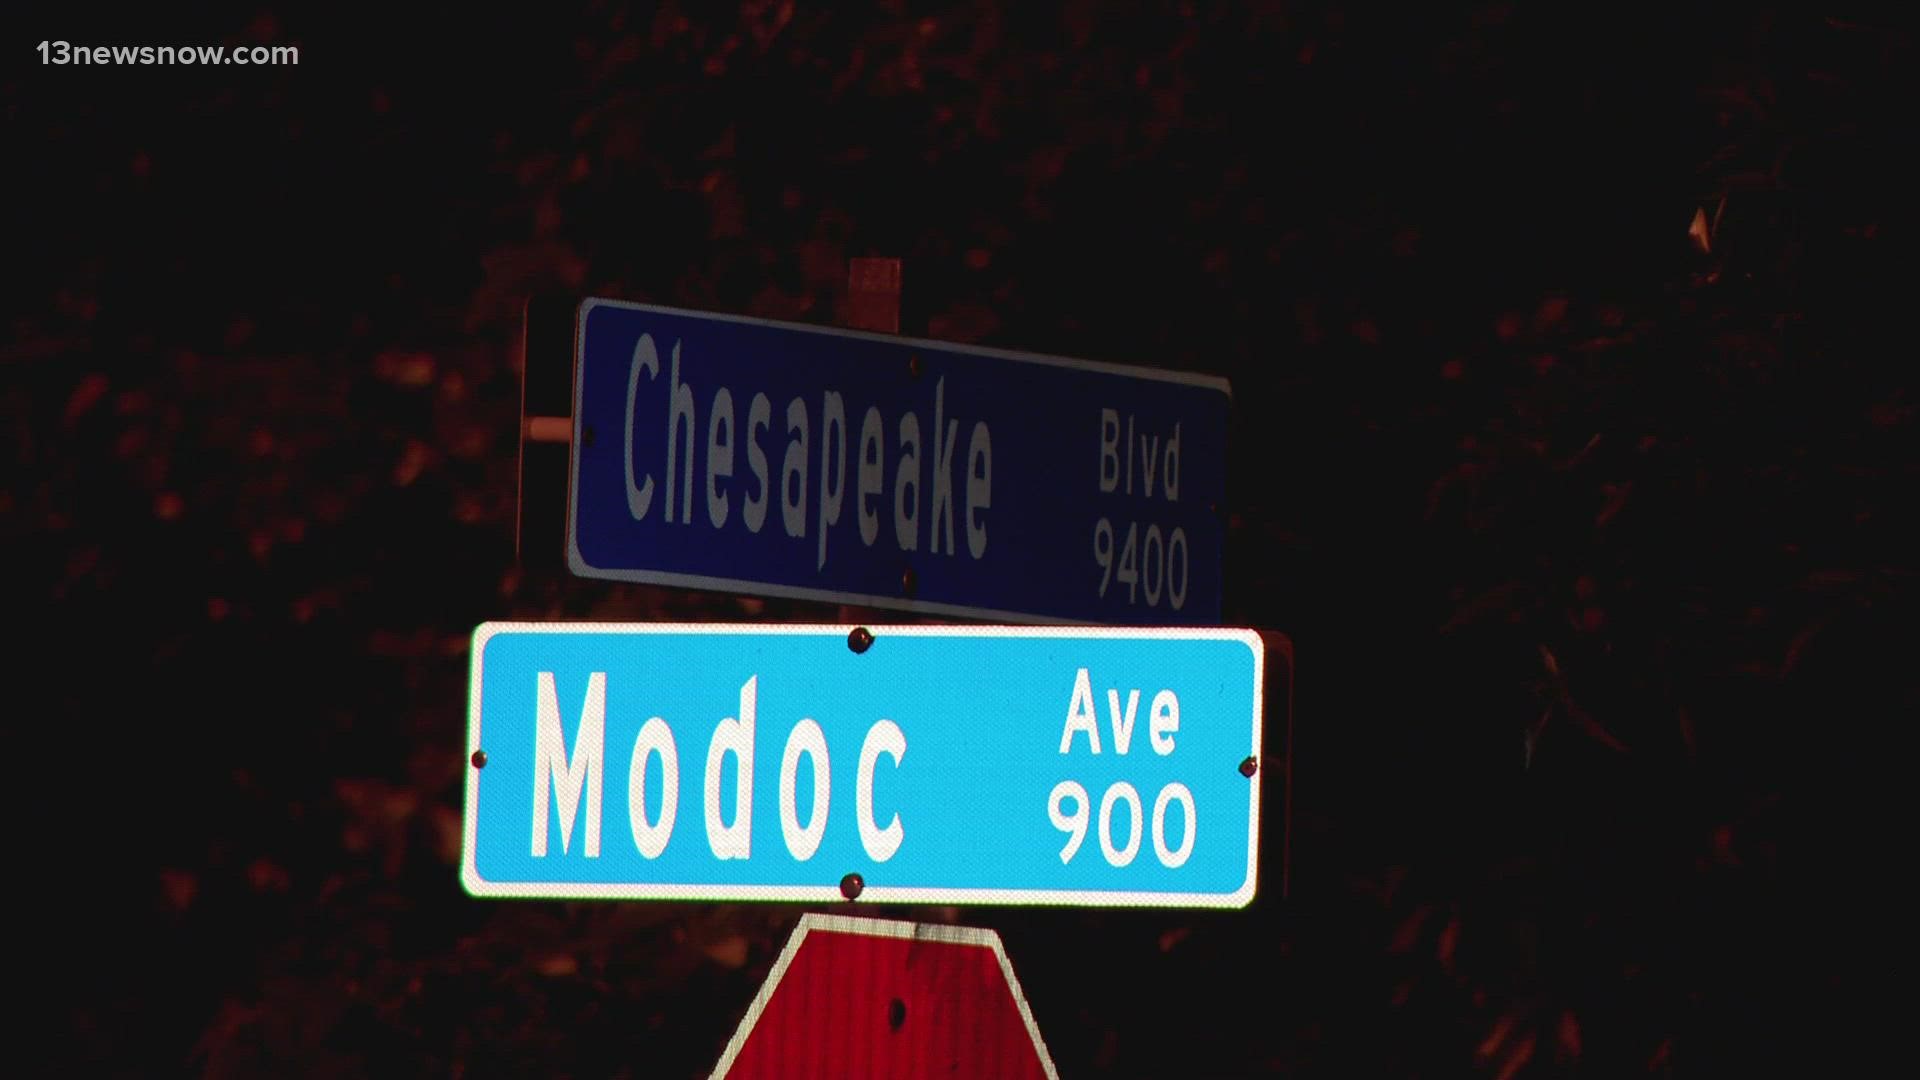 Norfolk police said a person died in a single-vehicle crash in the 9700 block of Chesapeake Blvd. Sunday around 9:30 p.m. That's located near E. Ocean View Avenue.